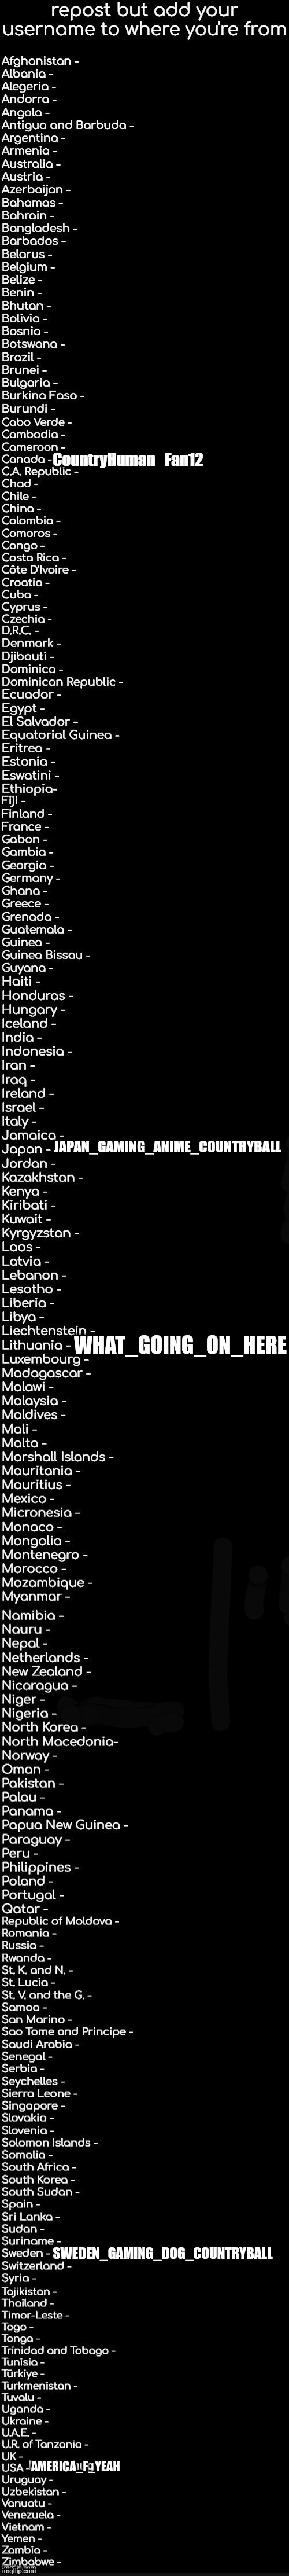 JAPAN_GAMING_ANIME_COUNTRYBALL; WHAT_GOING_ON_HERE | made w/ Imgflip meme maker